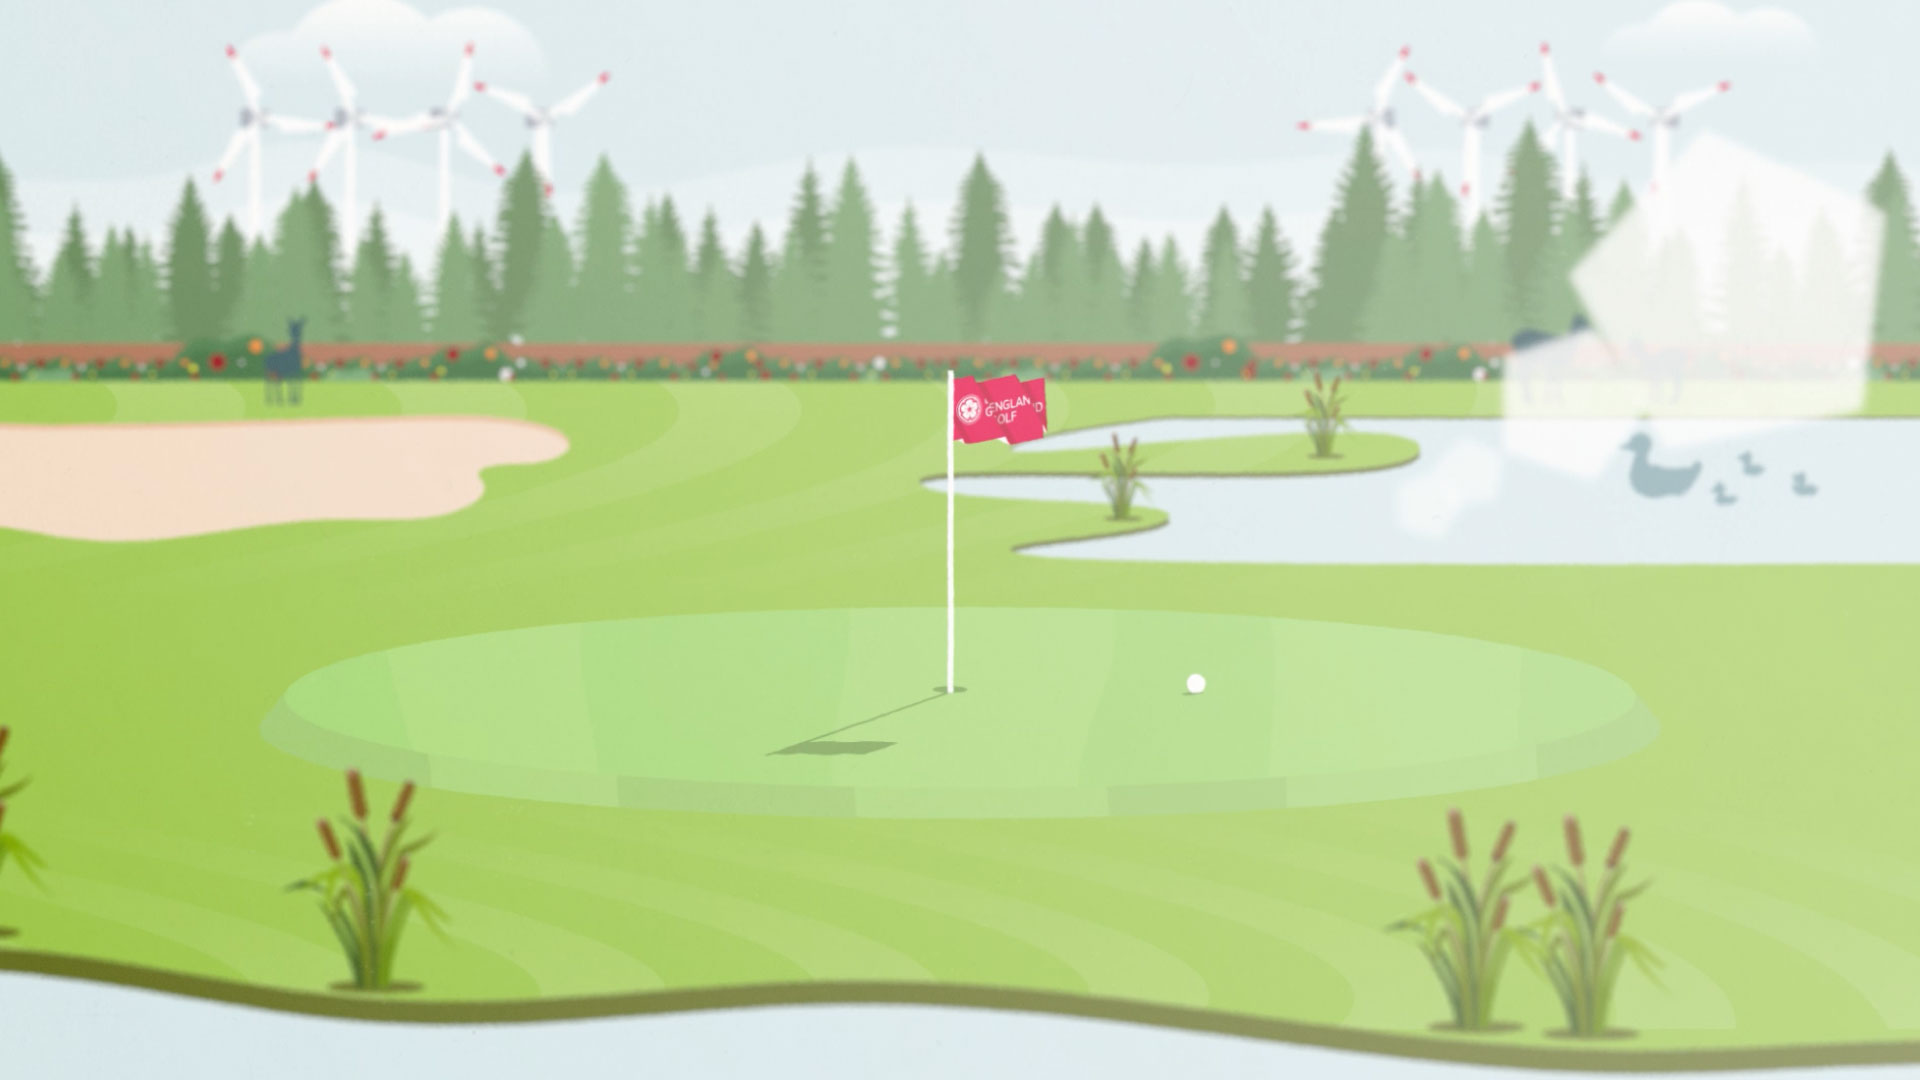 Animated scene of a golf course